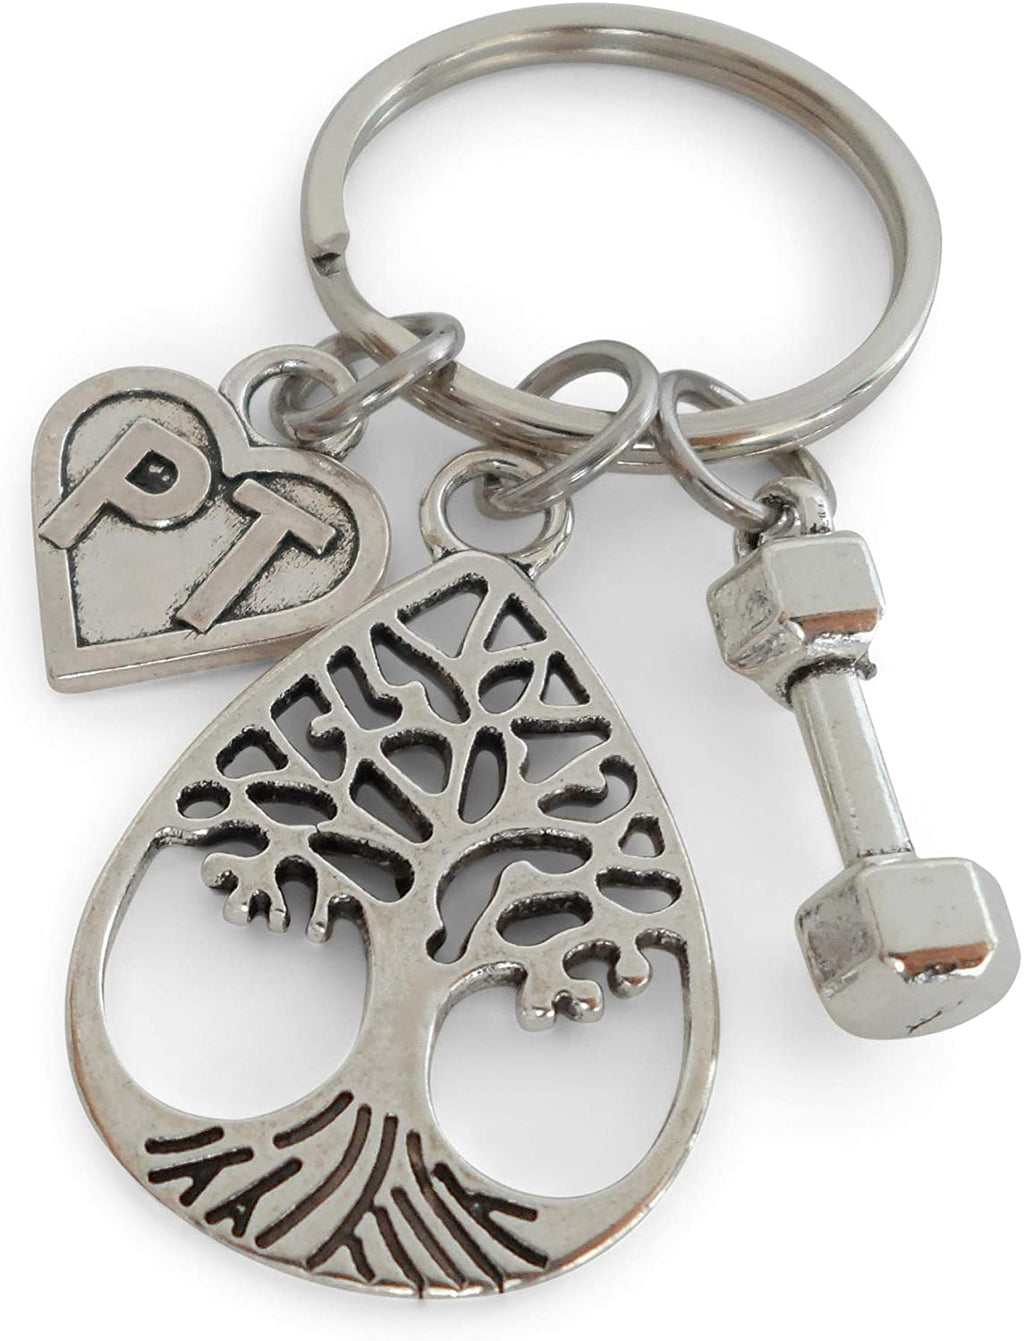 Physical Therapist Appreciation Gift Keychain for PT, Thank You Gift for Physical Therapist Staff, Weight & Teardrop Tree Charm